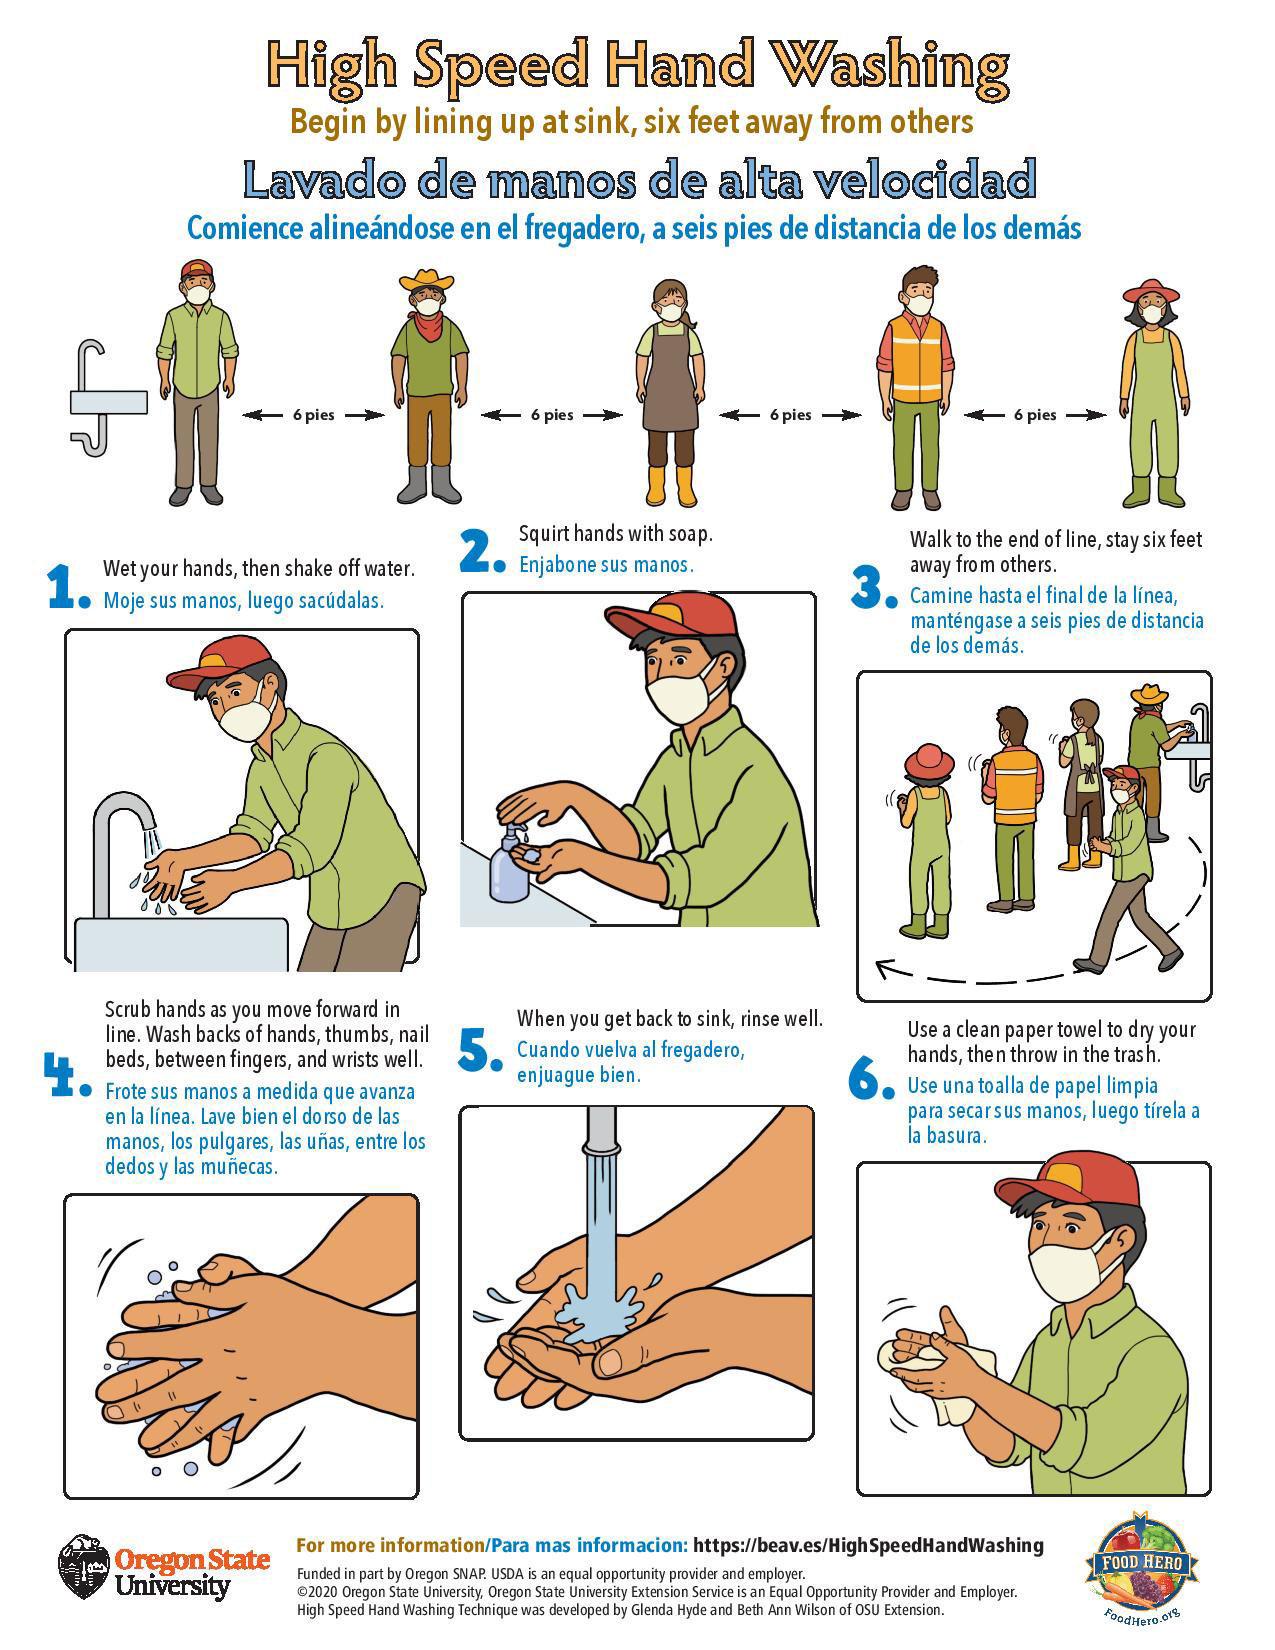 High Speed Hand Washing Poster that can be displayed in the workplace.